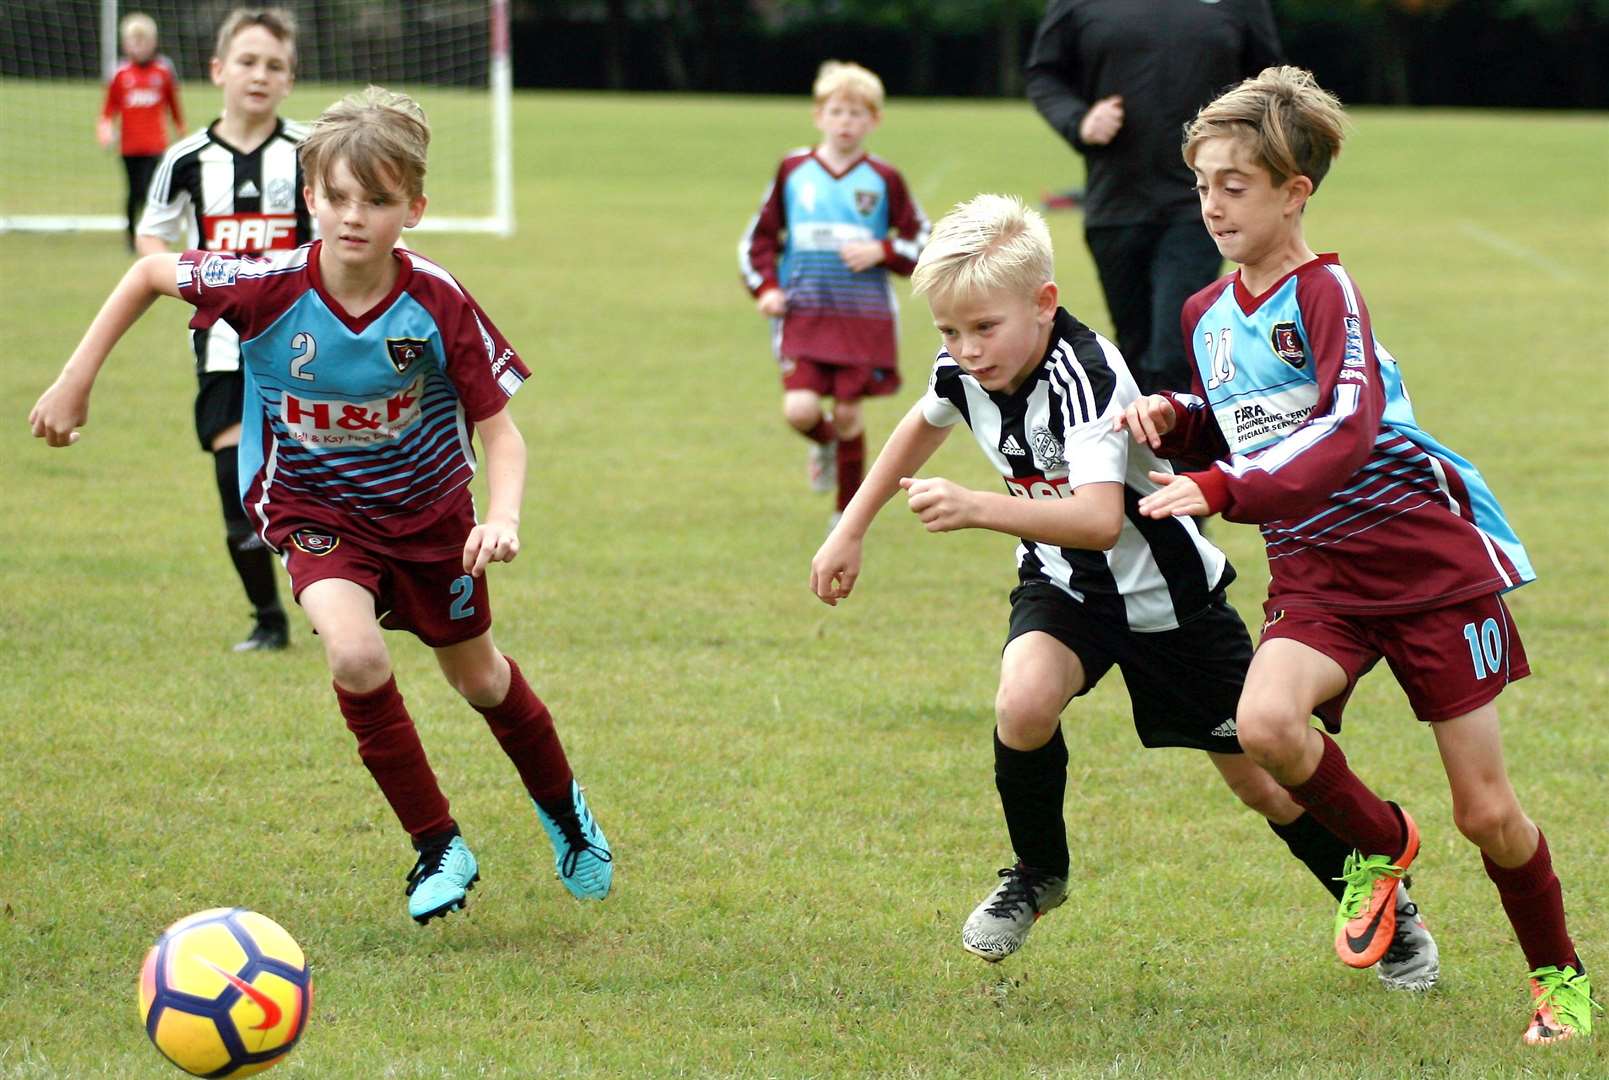 Wigmore Youth Whippets under-10s (claret) up against Real 60 Jaguars under-10s Picture: Phil Lee